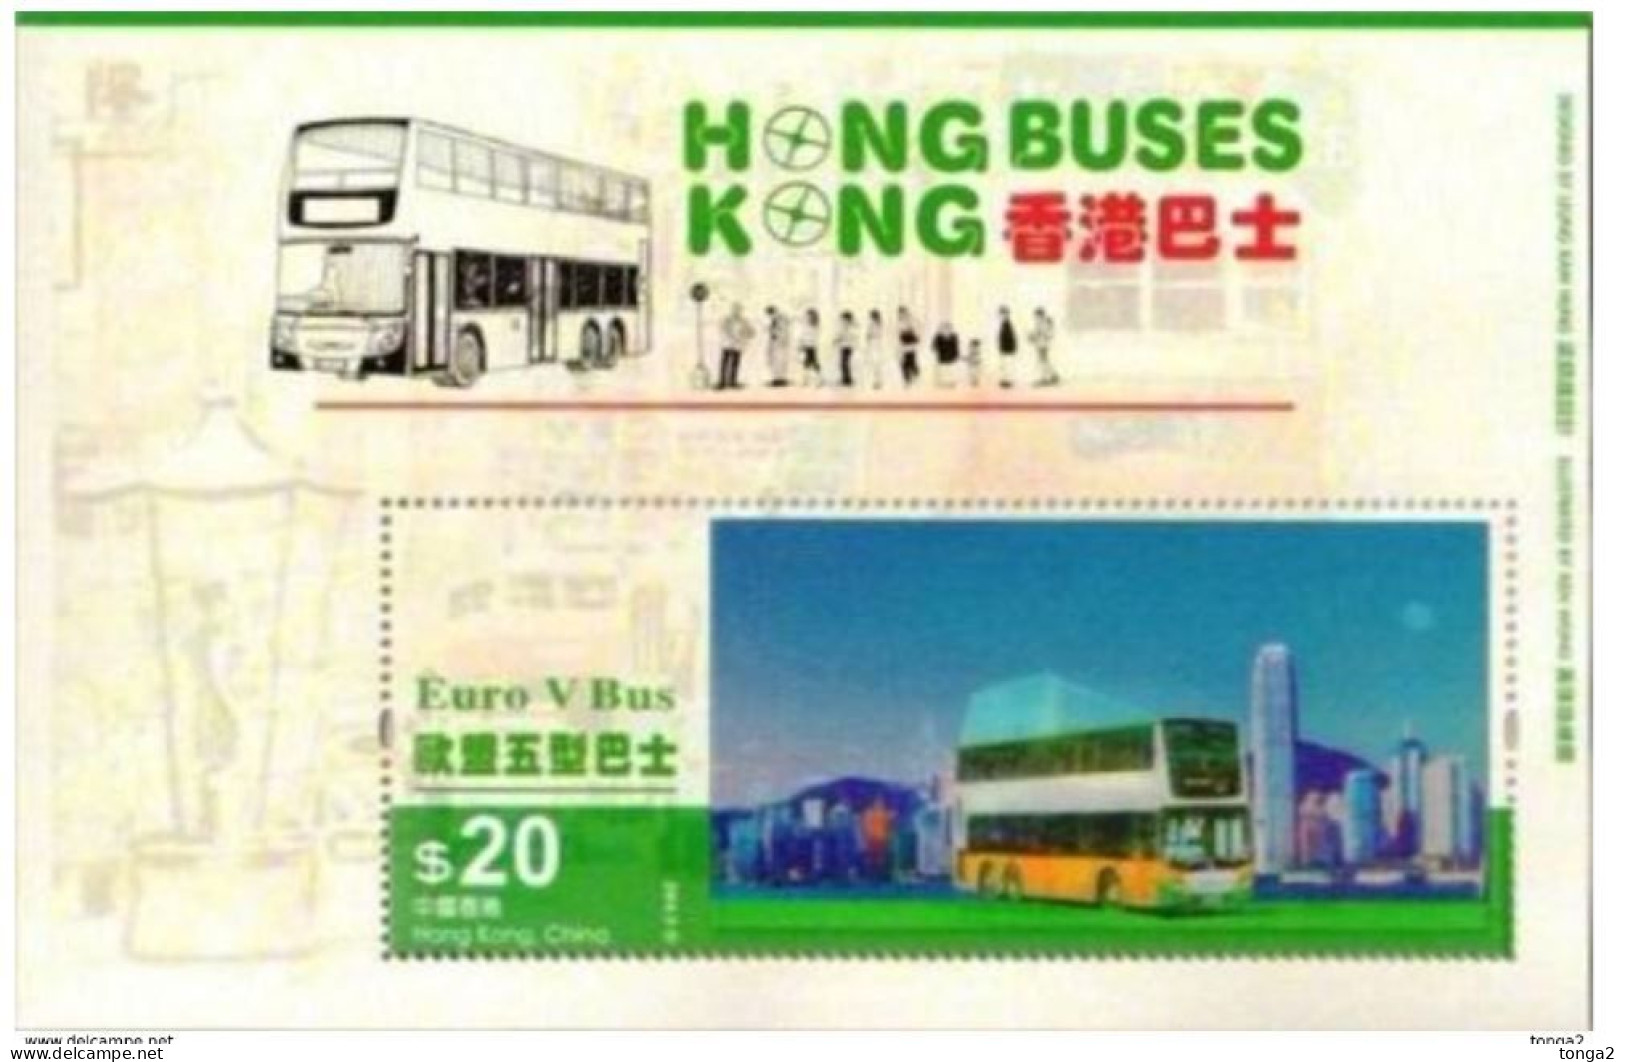 Hong Kong 2013 Bus S/S MNH - Stamp Shows Lenticular Movement - 3-D Pictures Move - Unusual - Busses